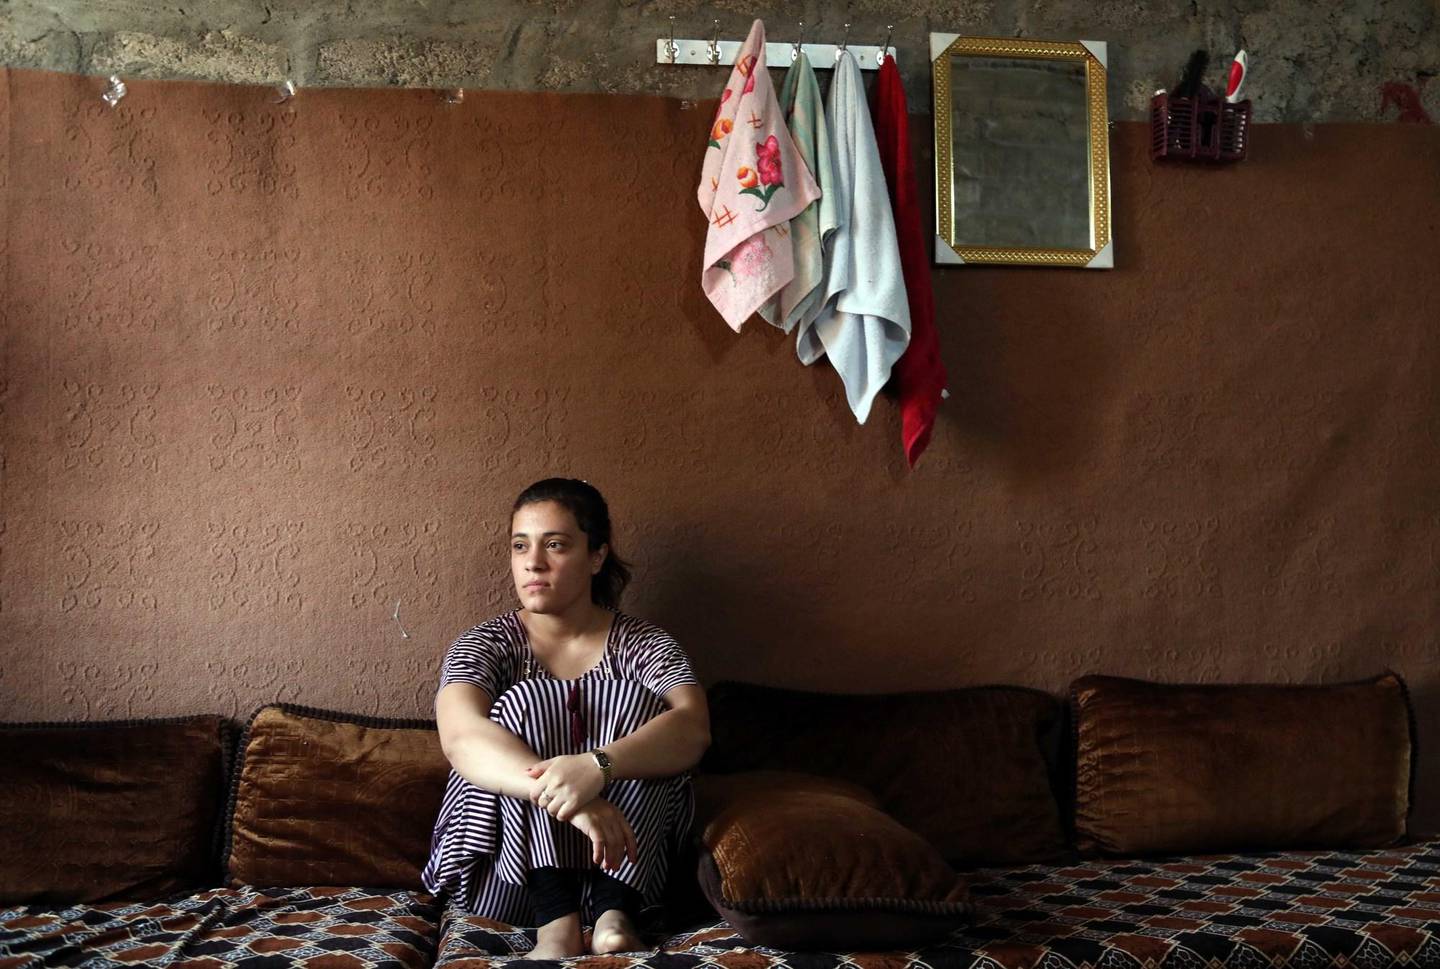 Iraq's Yazidi Jihan Qassem, 18, pauses as she talks to a AFP reporter at a makeshift house in an area housing many displaced people on the outskirts of the northwestern Iraqi town of Baadre on June 25, 2019. - Three children fathered by her Islamic State group husband. Three siblings missing since the Islamic State group ravaged her village in 2014. At 18, Yazidi survivor Jihan abandoned the former to honour the latter. The same gutwrenching dilemma has been faced by dozens of Yazidi women and girls forced to carry jihadists' children after IS abducted them from their ancestral Iraqi home of Sinjar in 2014. (Photo by SAFIN HAMED / AFP)